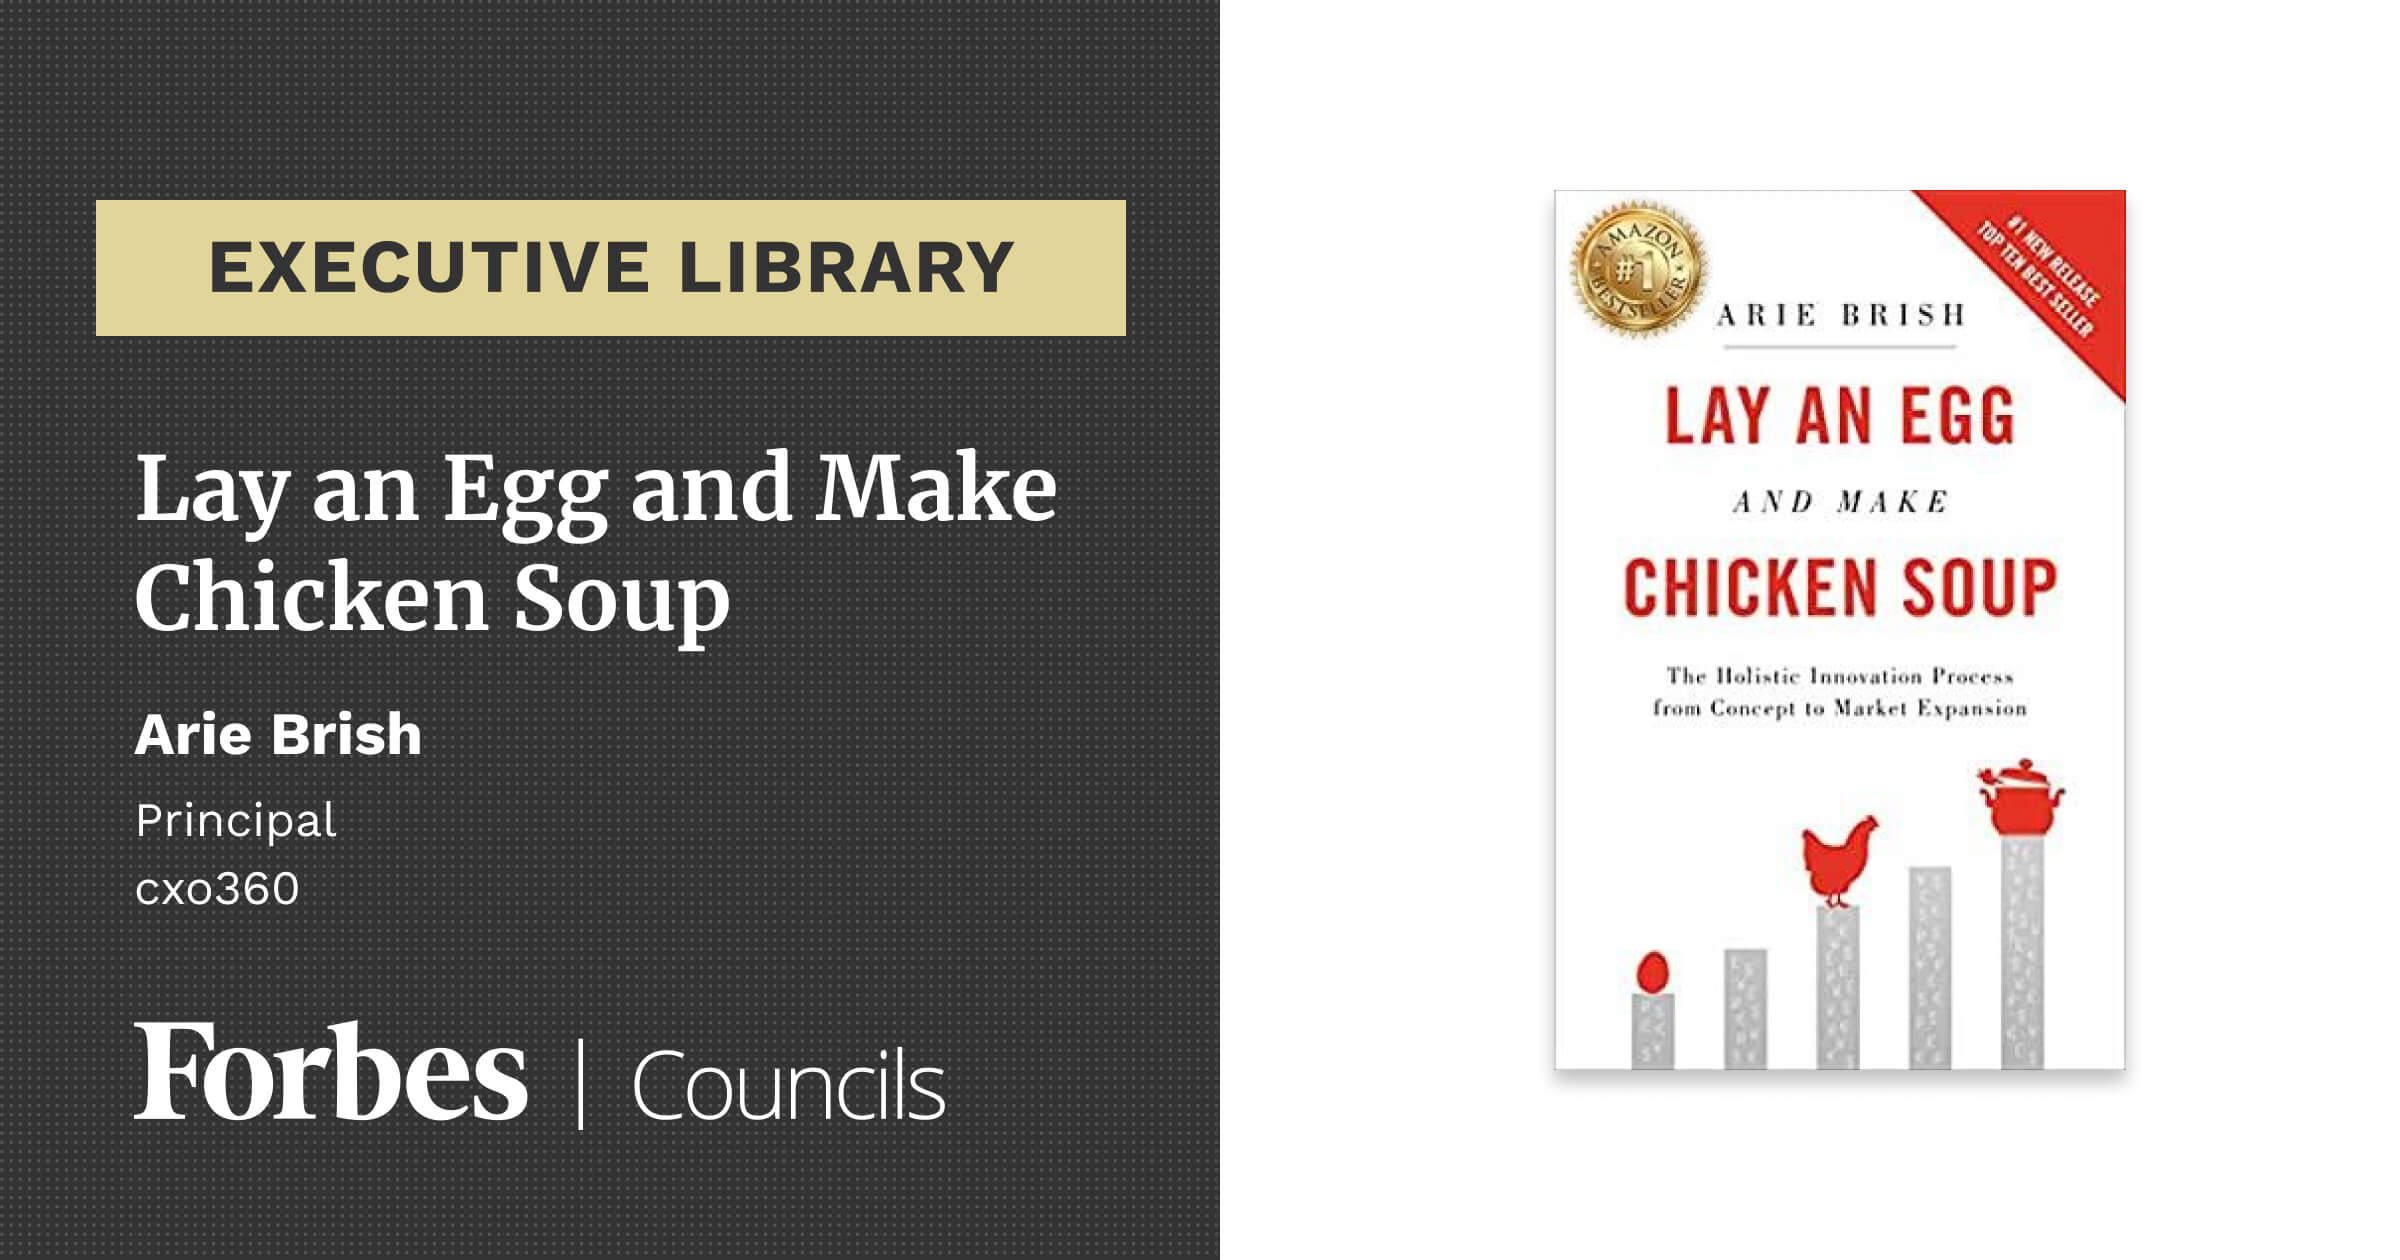 Lay an Egg and Make Chicken Soup by Arie Brish